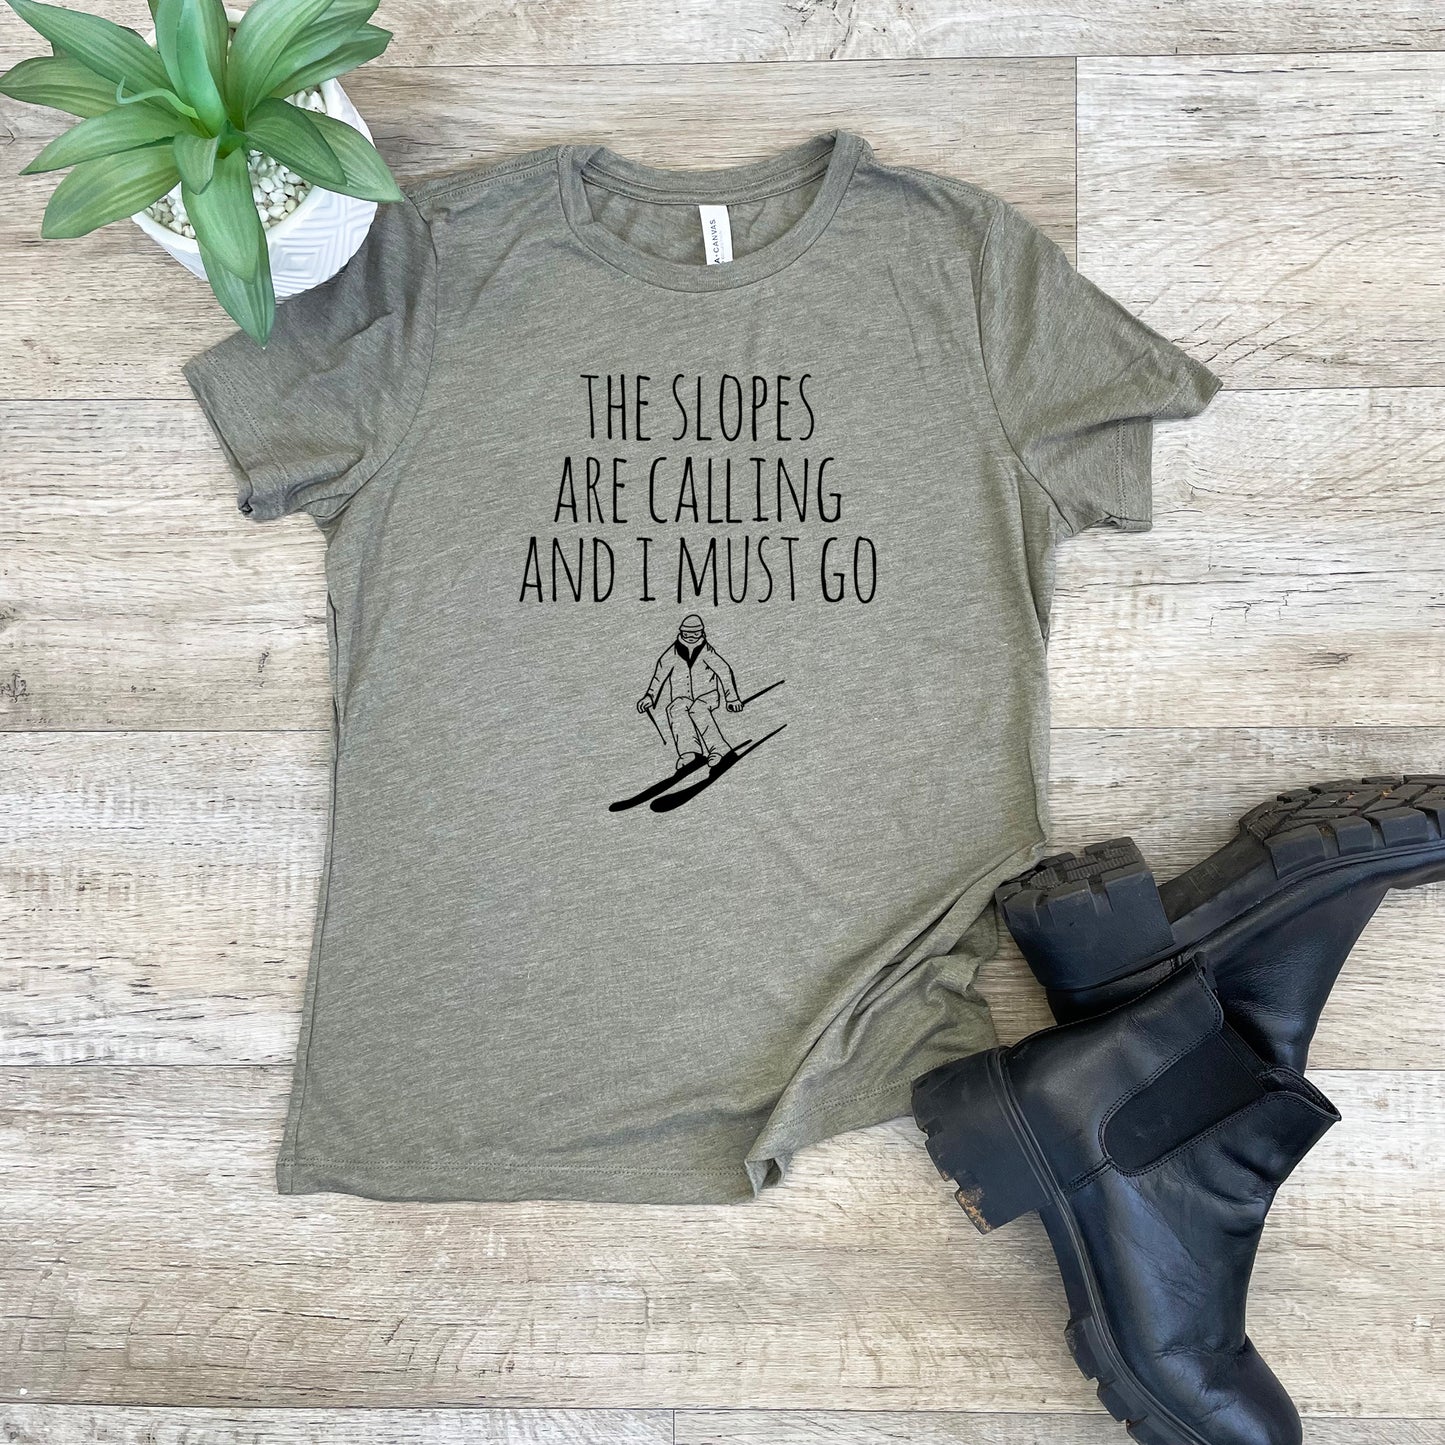 Slopes Are Calling And I Must Go (Skiing) - Women's Crew Tee - Olive or Dusty Blue